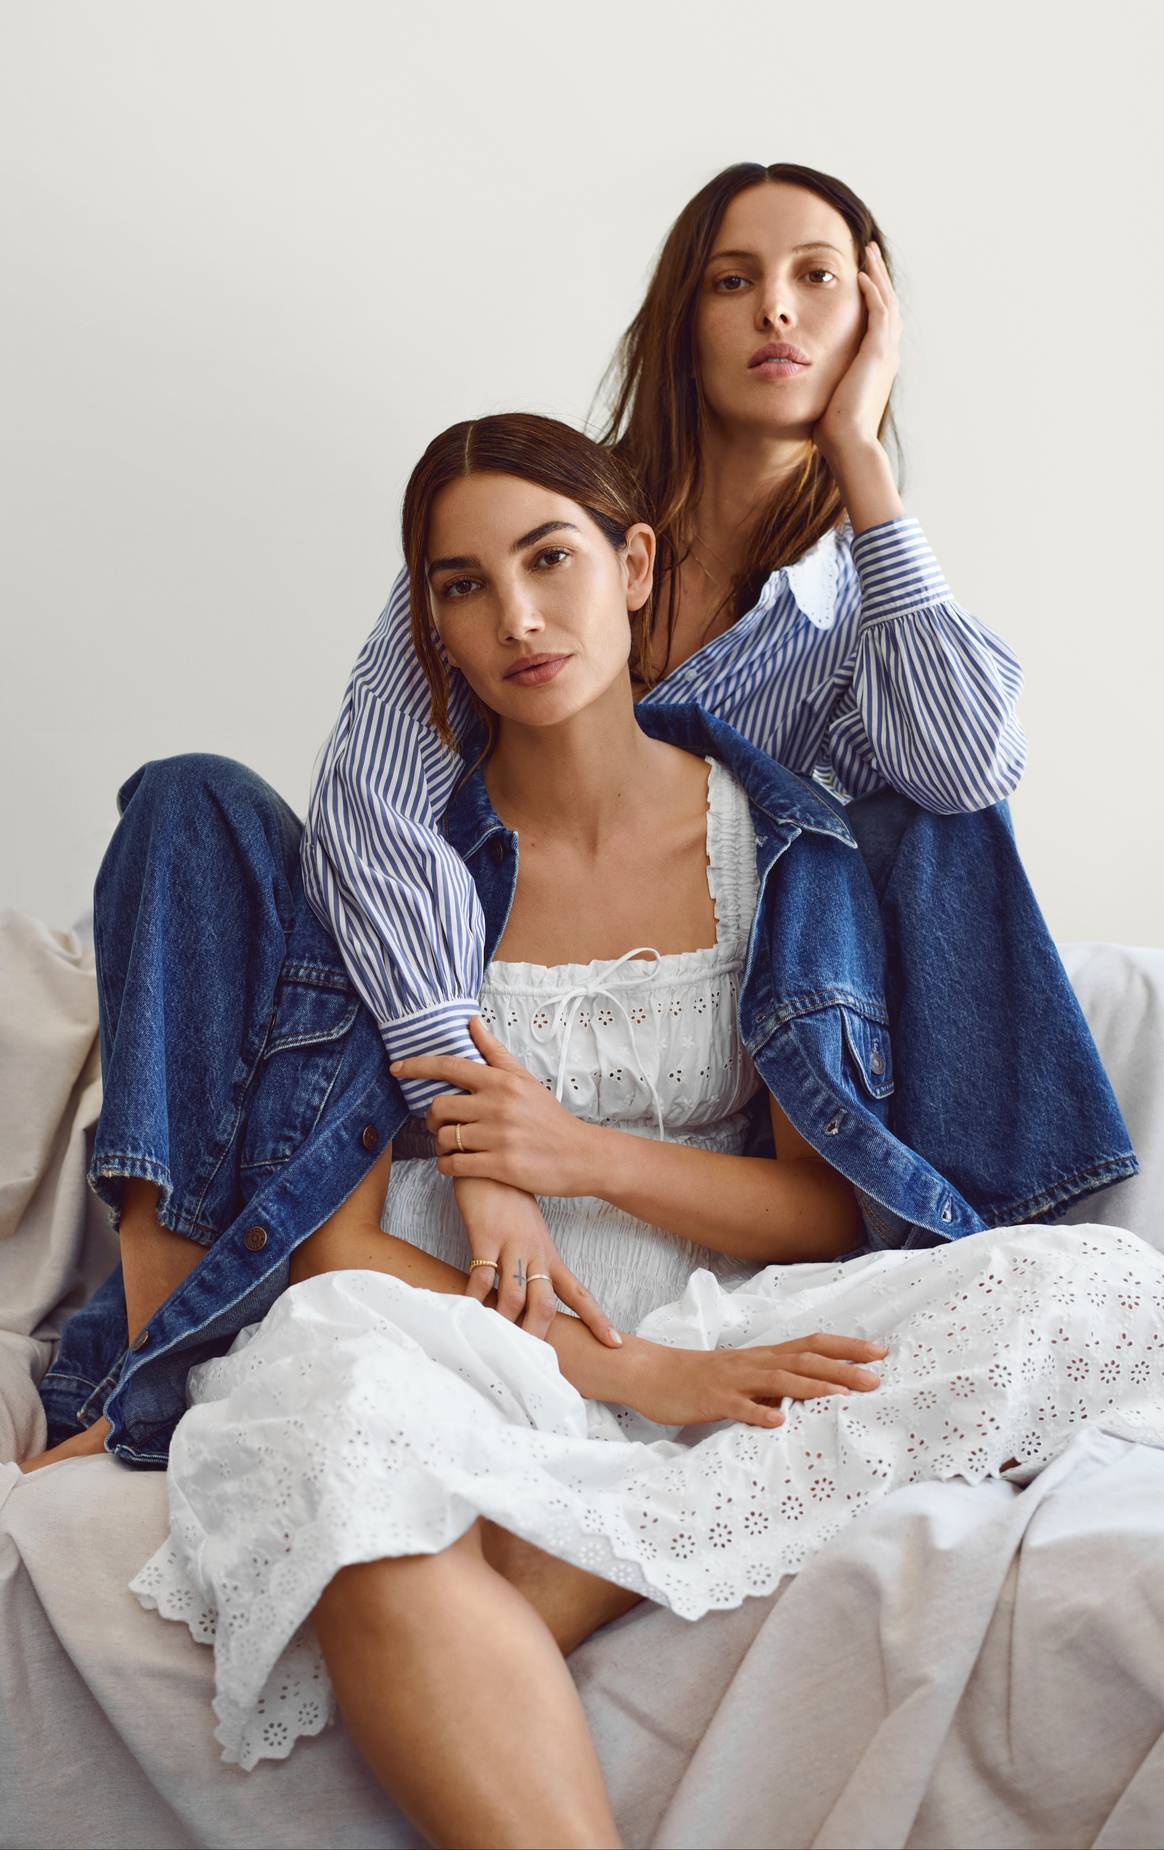 Gap x Dôen campaign starring Lily and Ruby Aldridge